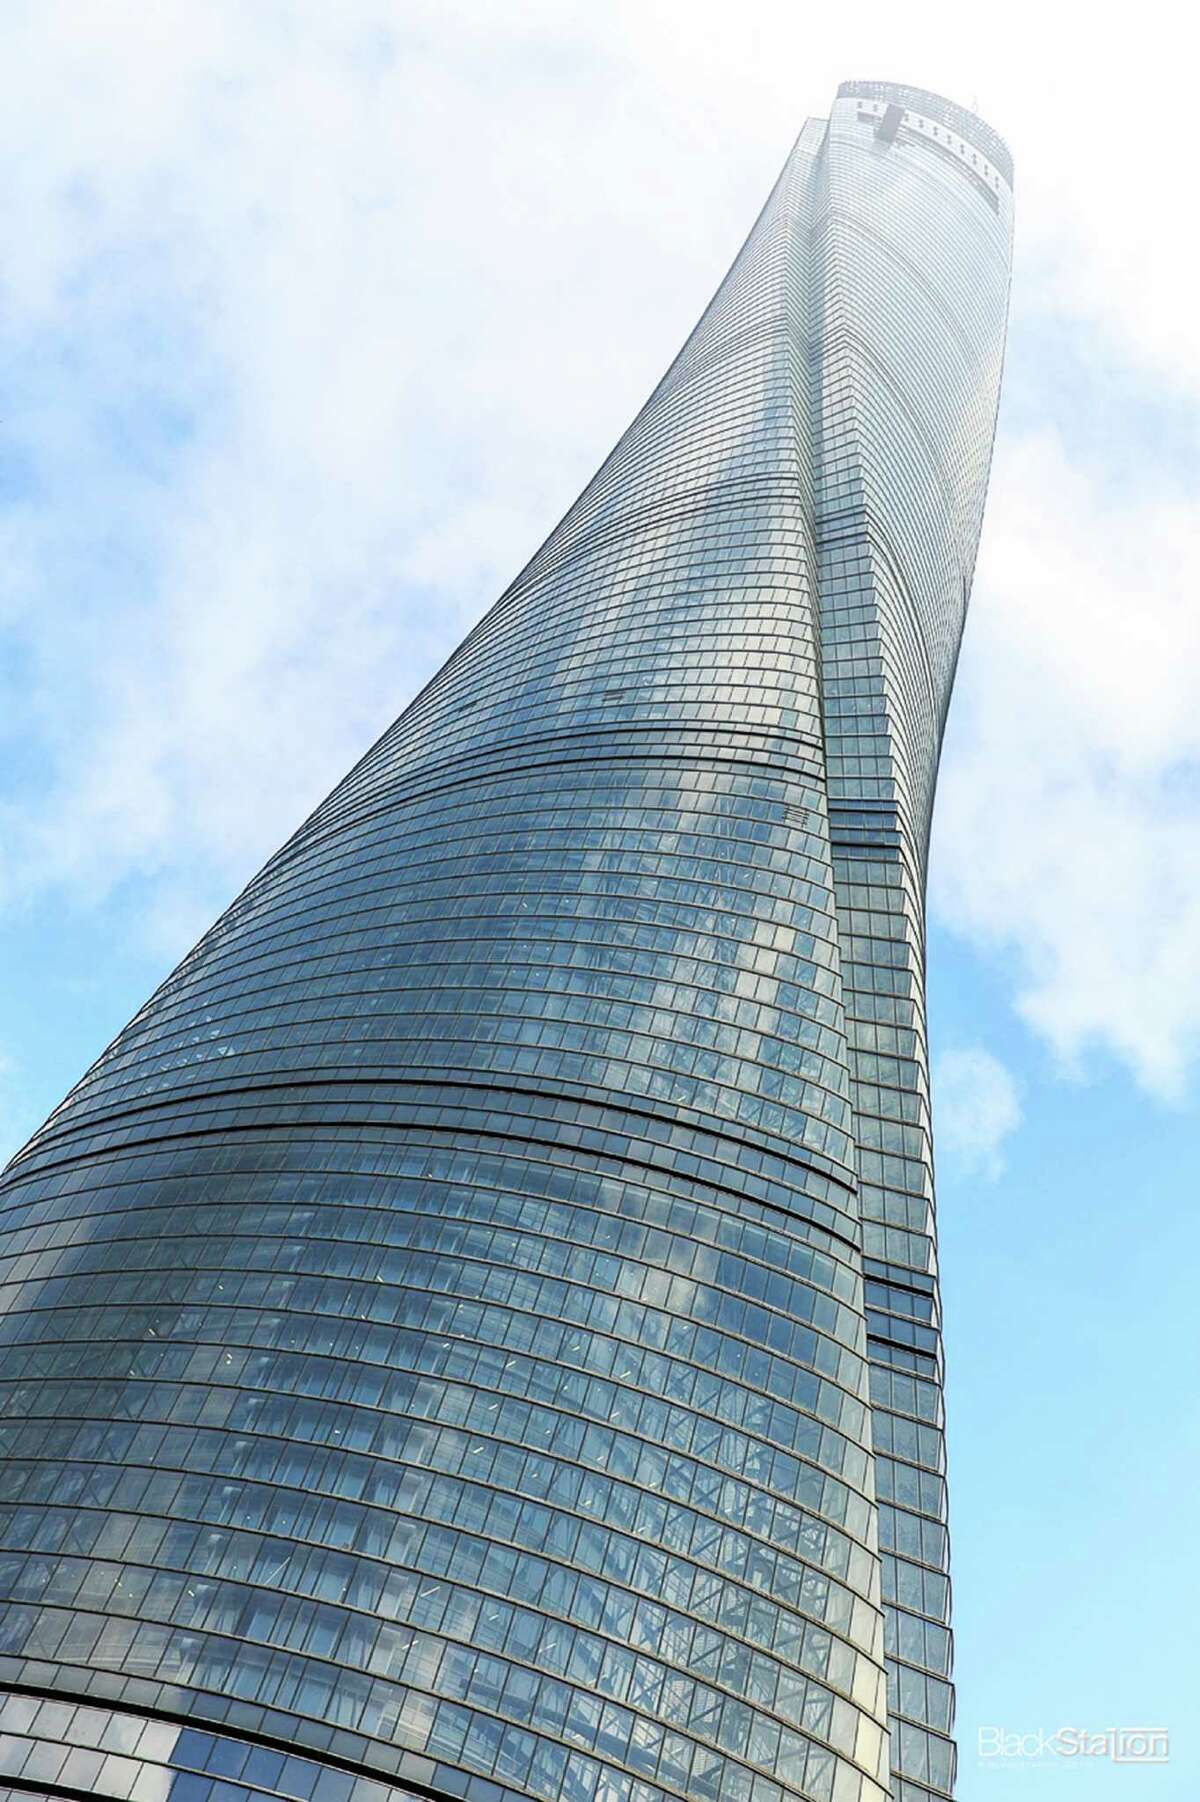 The Shanghai Tower in China was completed in 2015 as the second tallest building in the world, rising 2,073 feet or 632 meters tall, according to the Council on Tall Buildings and Urban Habitat. The building was designed by Gensler.